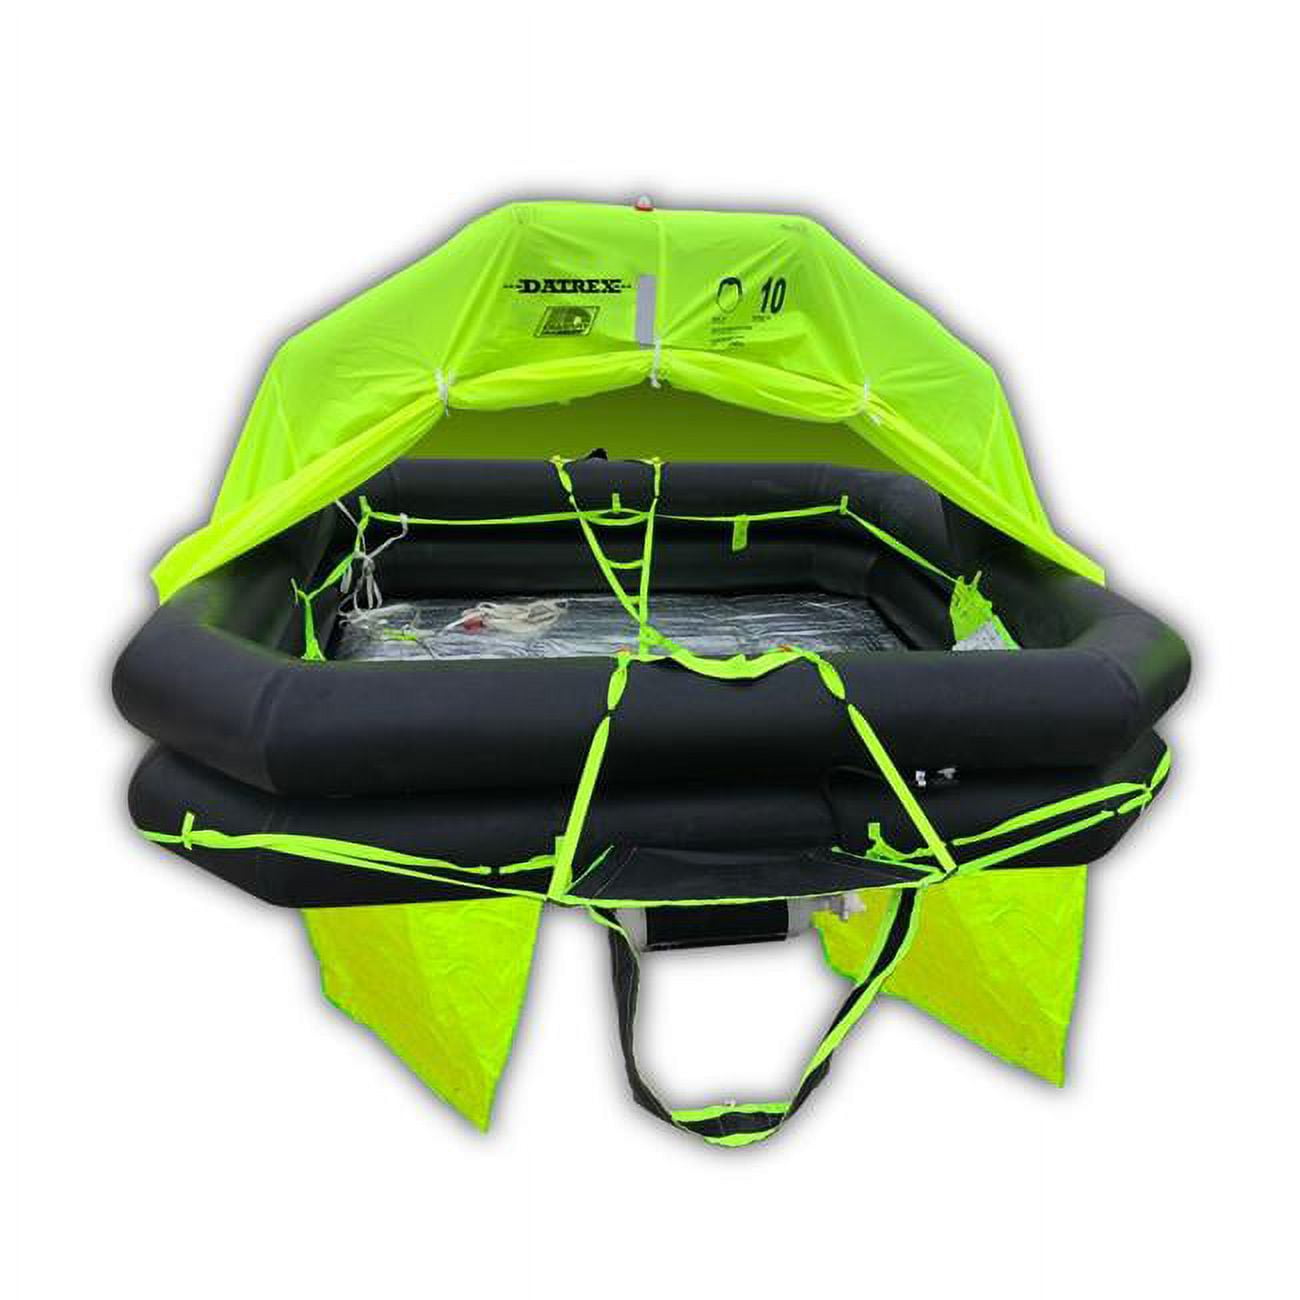 DUY6SVR 6 Person Liberty Recreational Offshore Raft with Liferaft in Valise -  Datrex